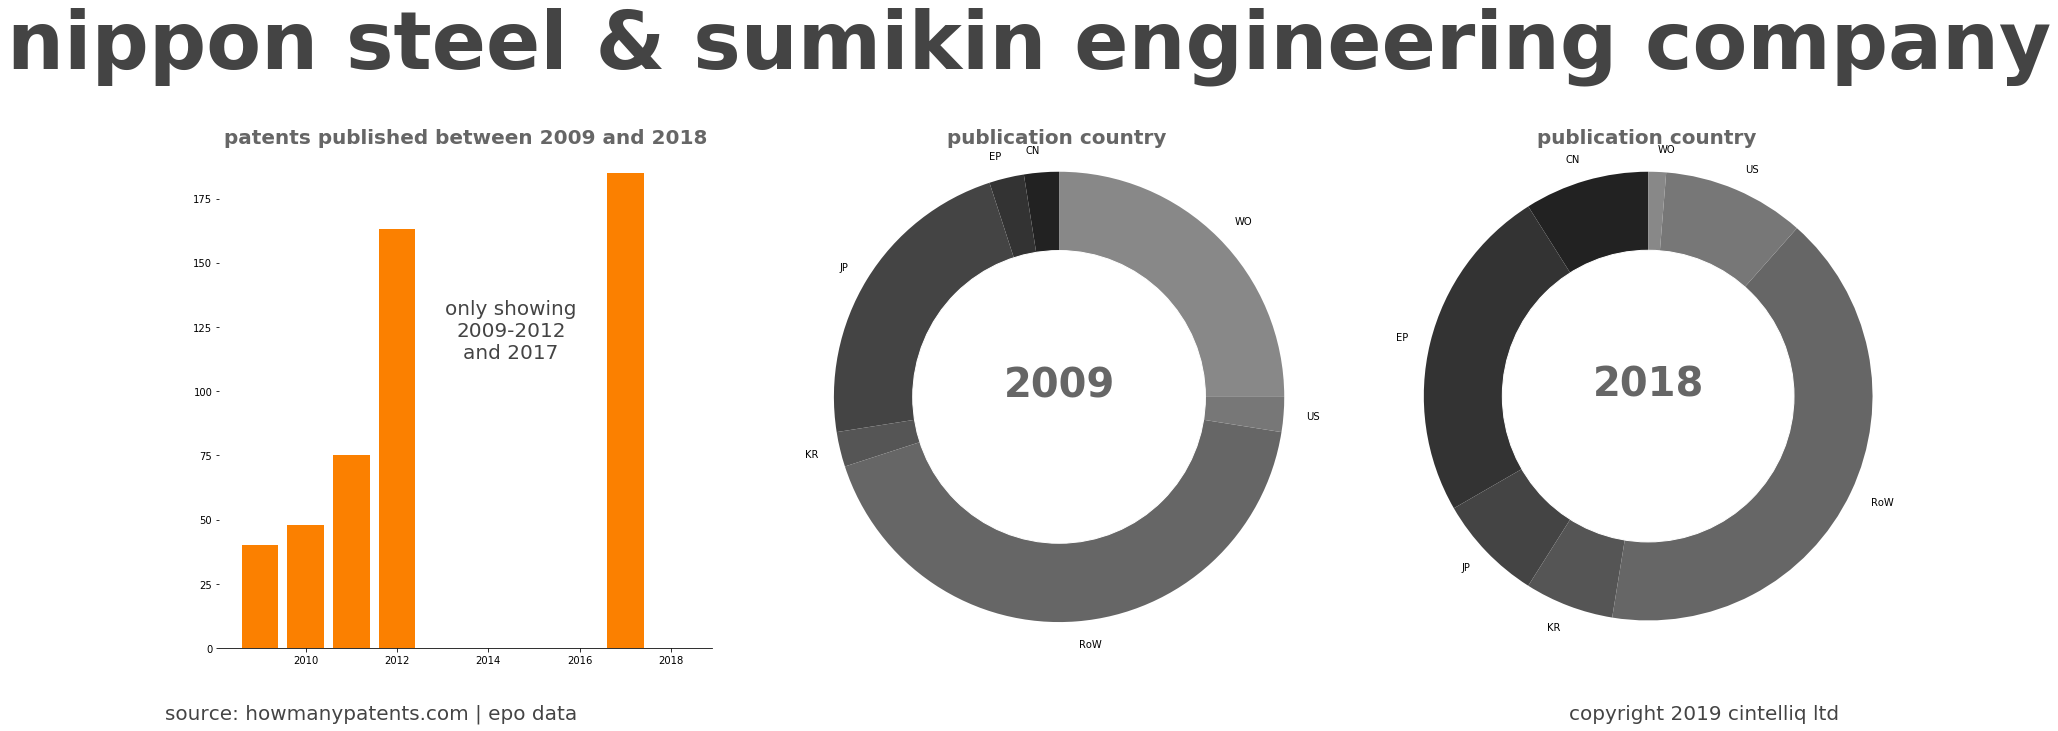 summary of patents for Nippon Steel & Sumikin Engineering Company